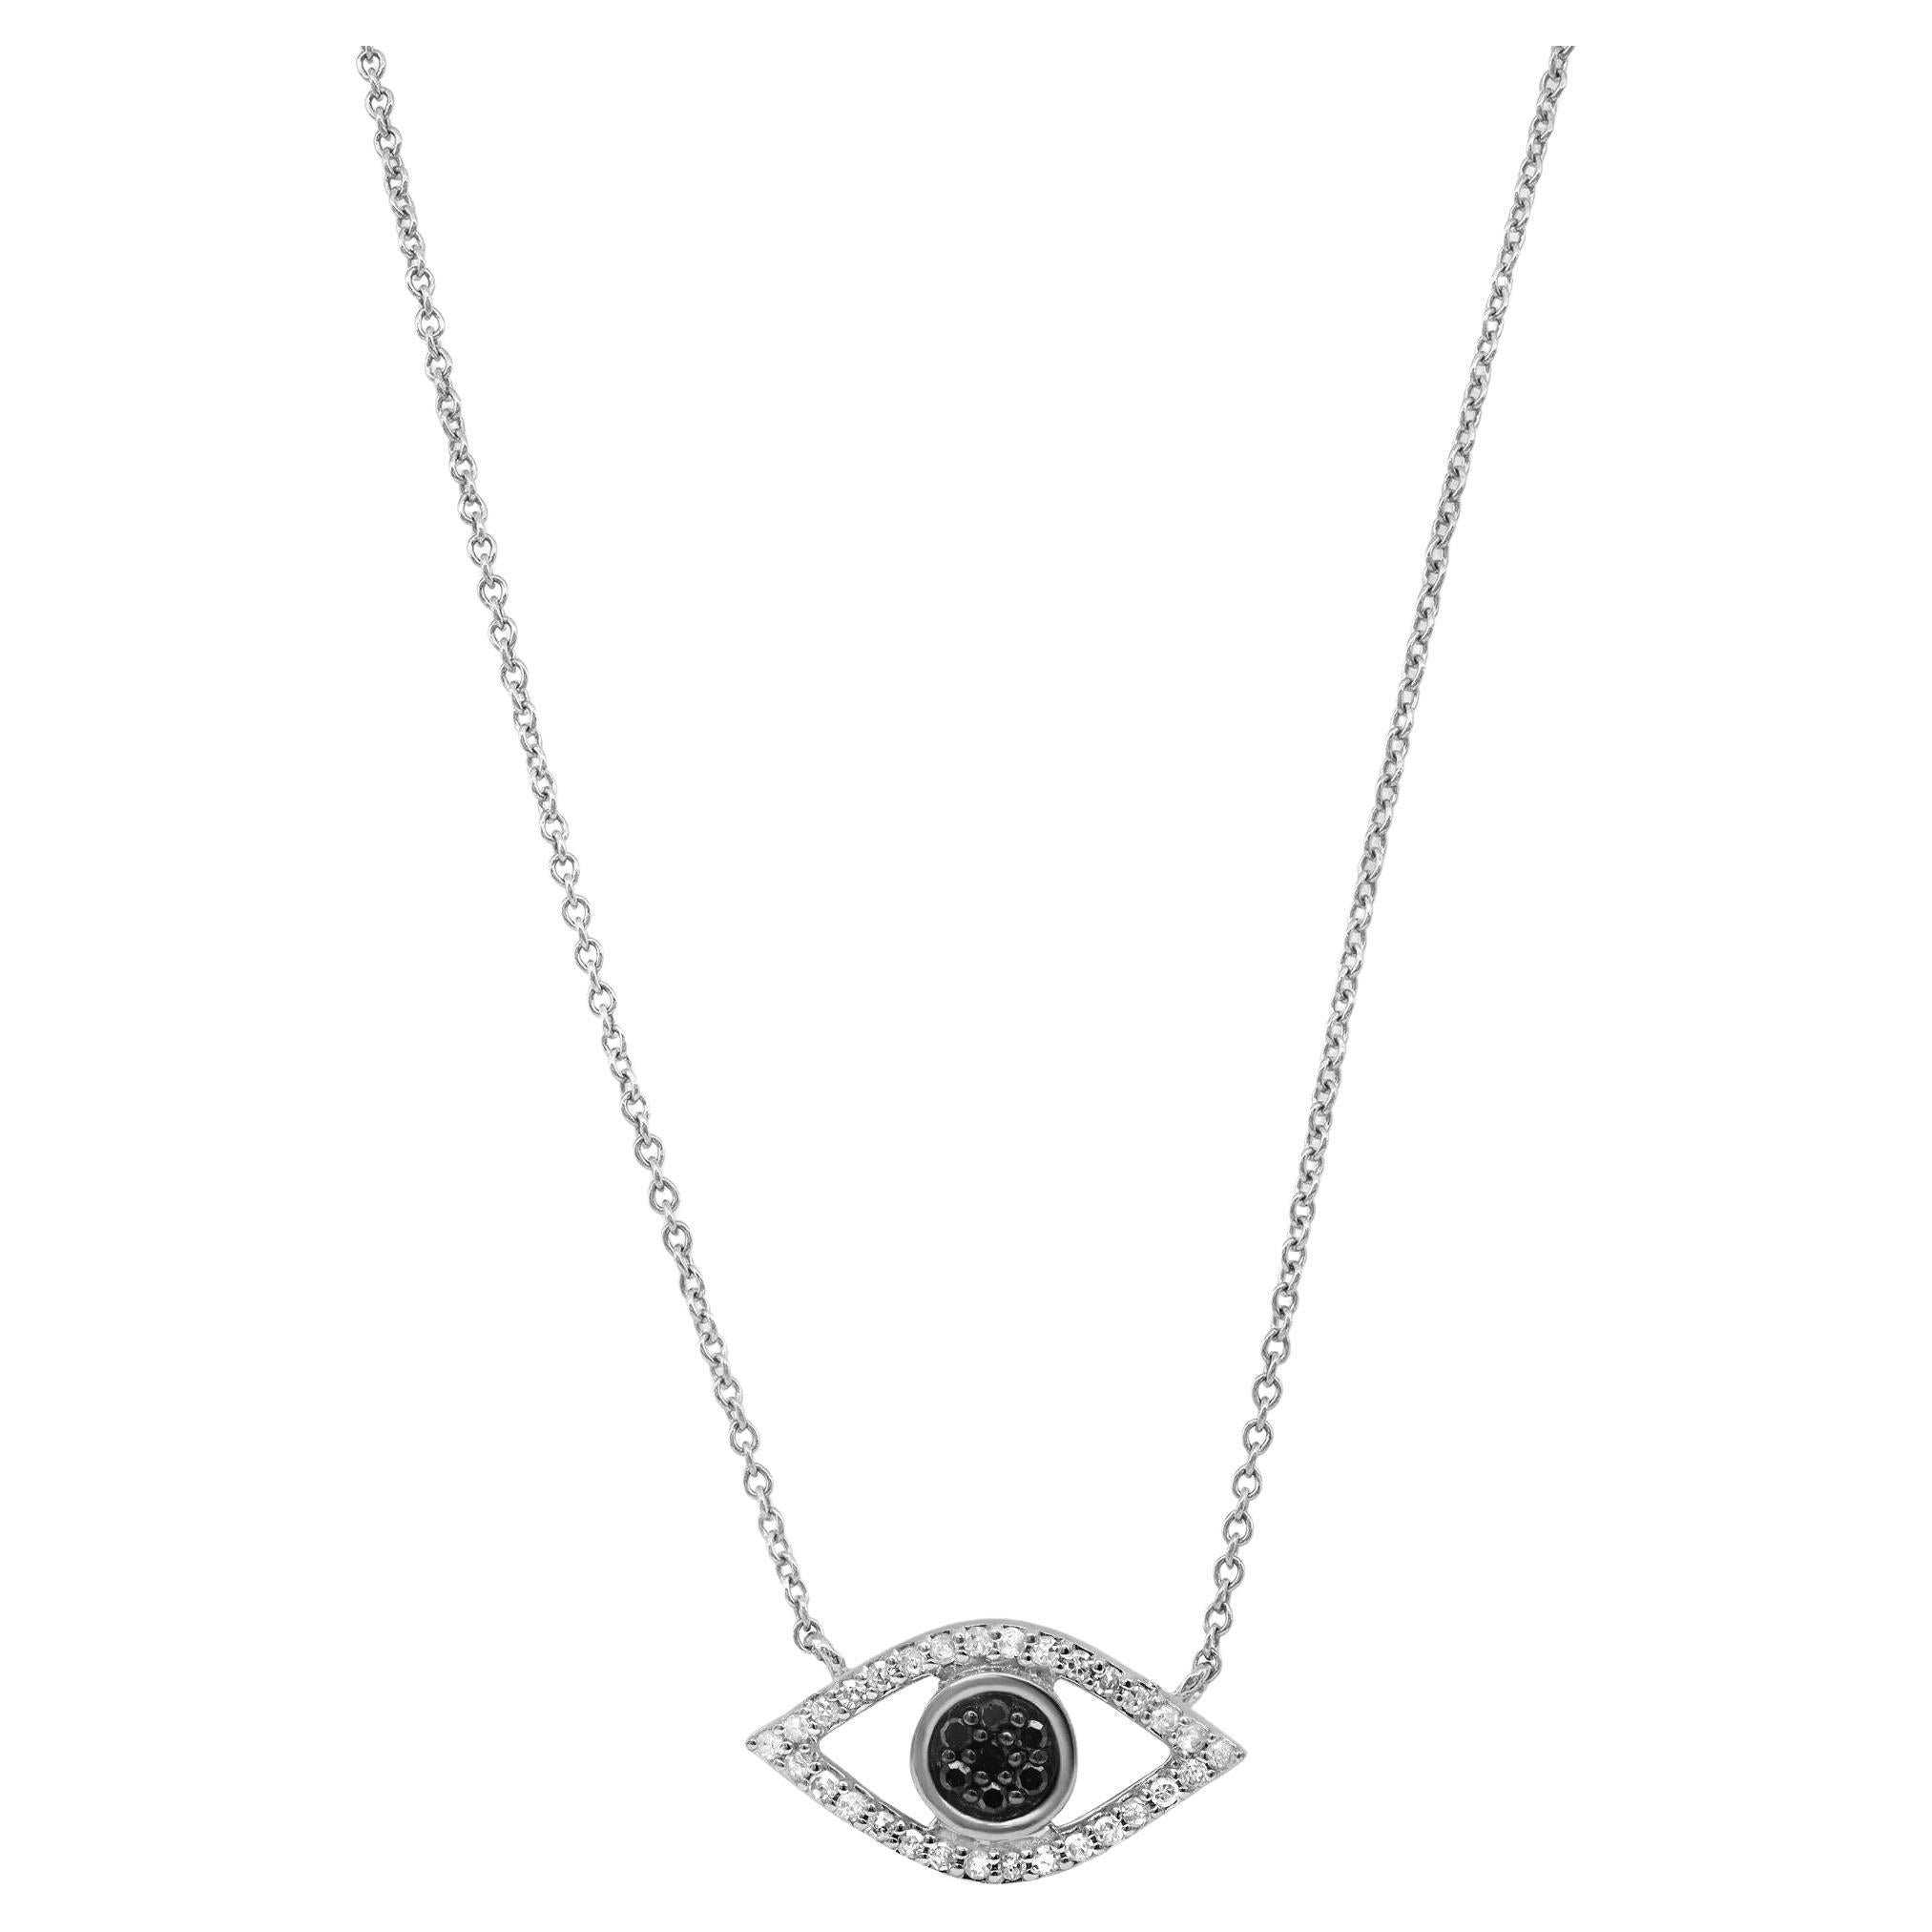 Evil Eye Pave Diamond Pendant Necklace In 14K White Gold 0.18Cttw